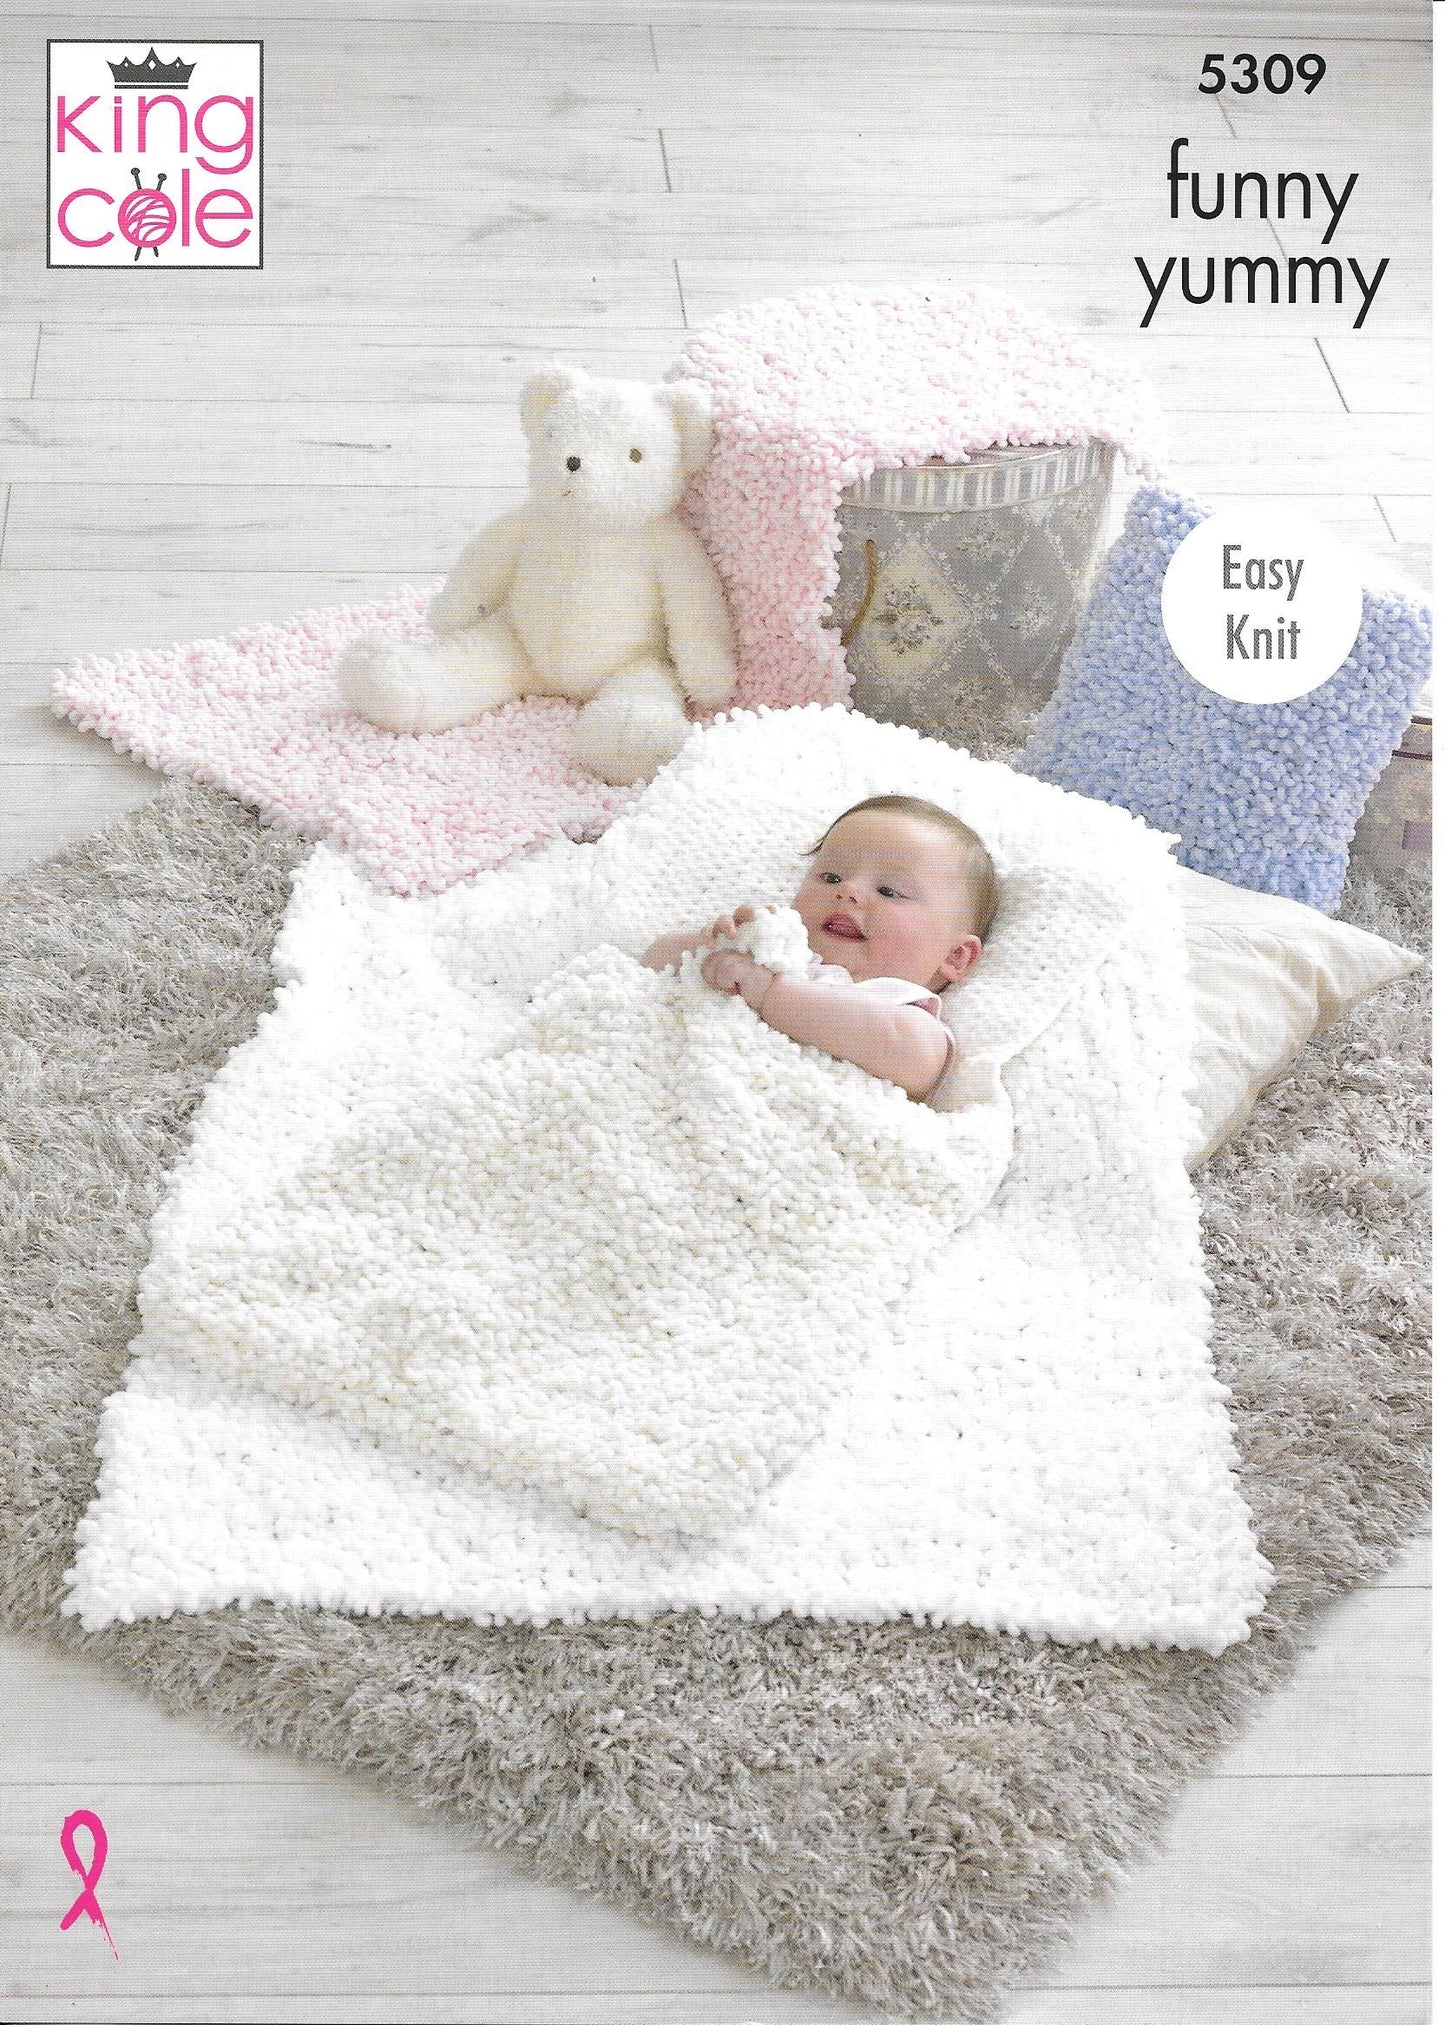 5309 King Cole Funny Yummy Cot Blanket, Pram Cover, Sleeping Bag and Cushion Knitting pattern